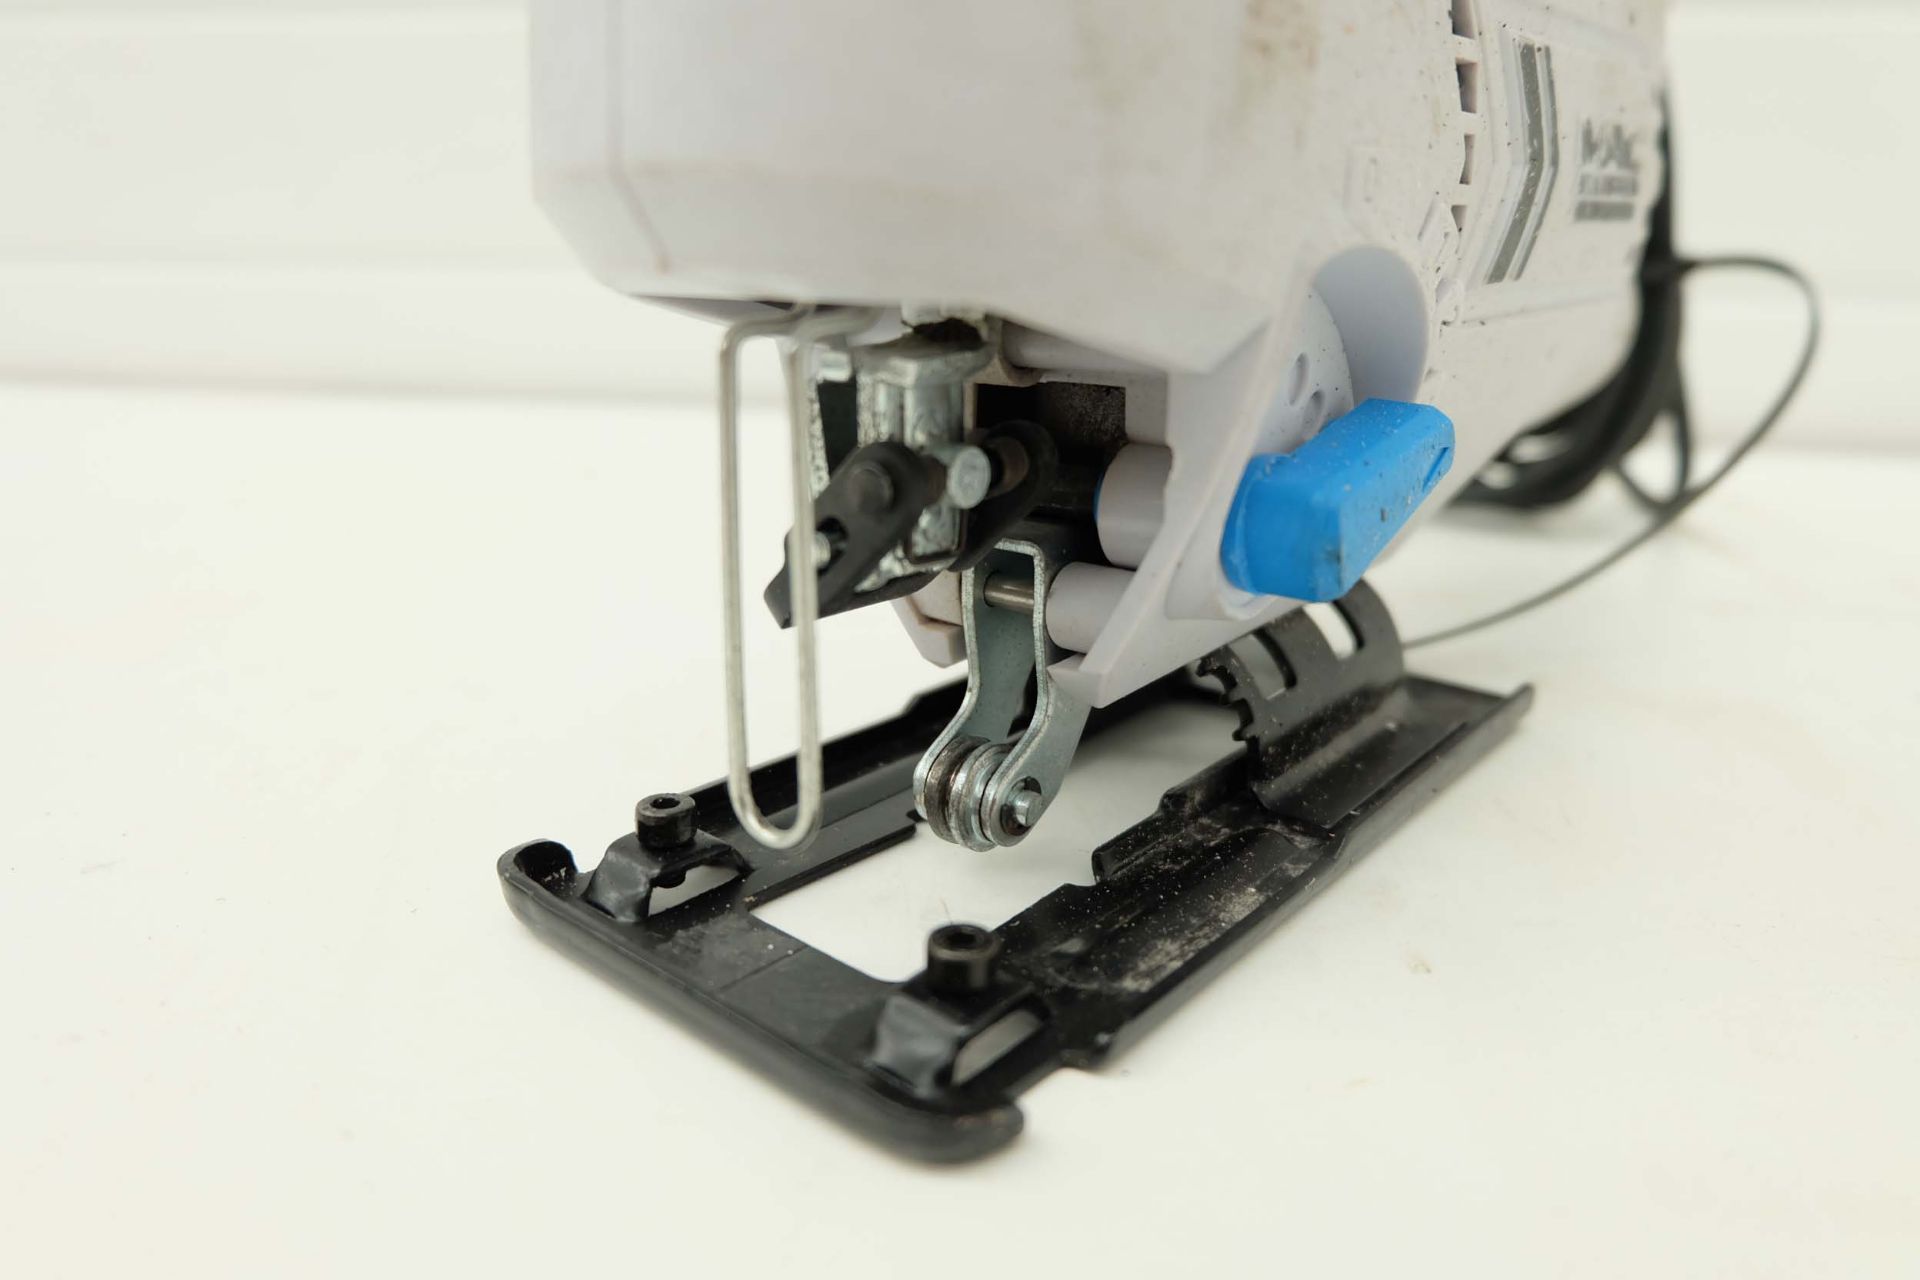 MacAllister MSJS600 Corded Jigsaw. Max Cutting Depth 80mm. Single Phase 600W. - Image 4 of 6